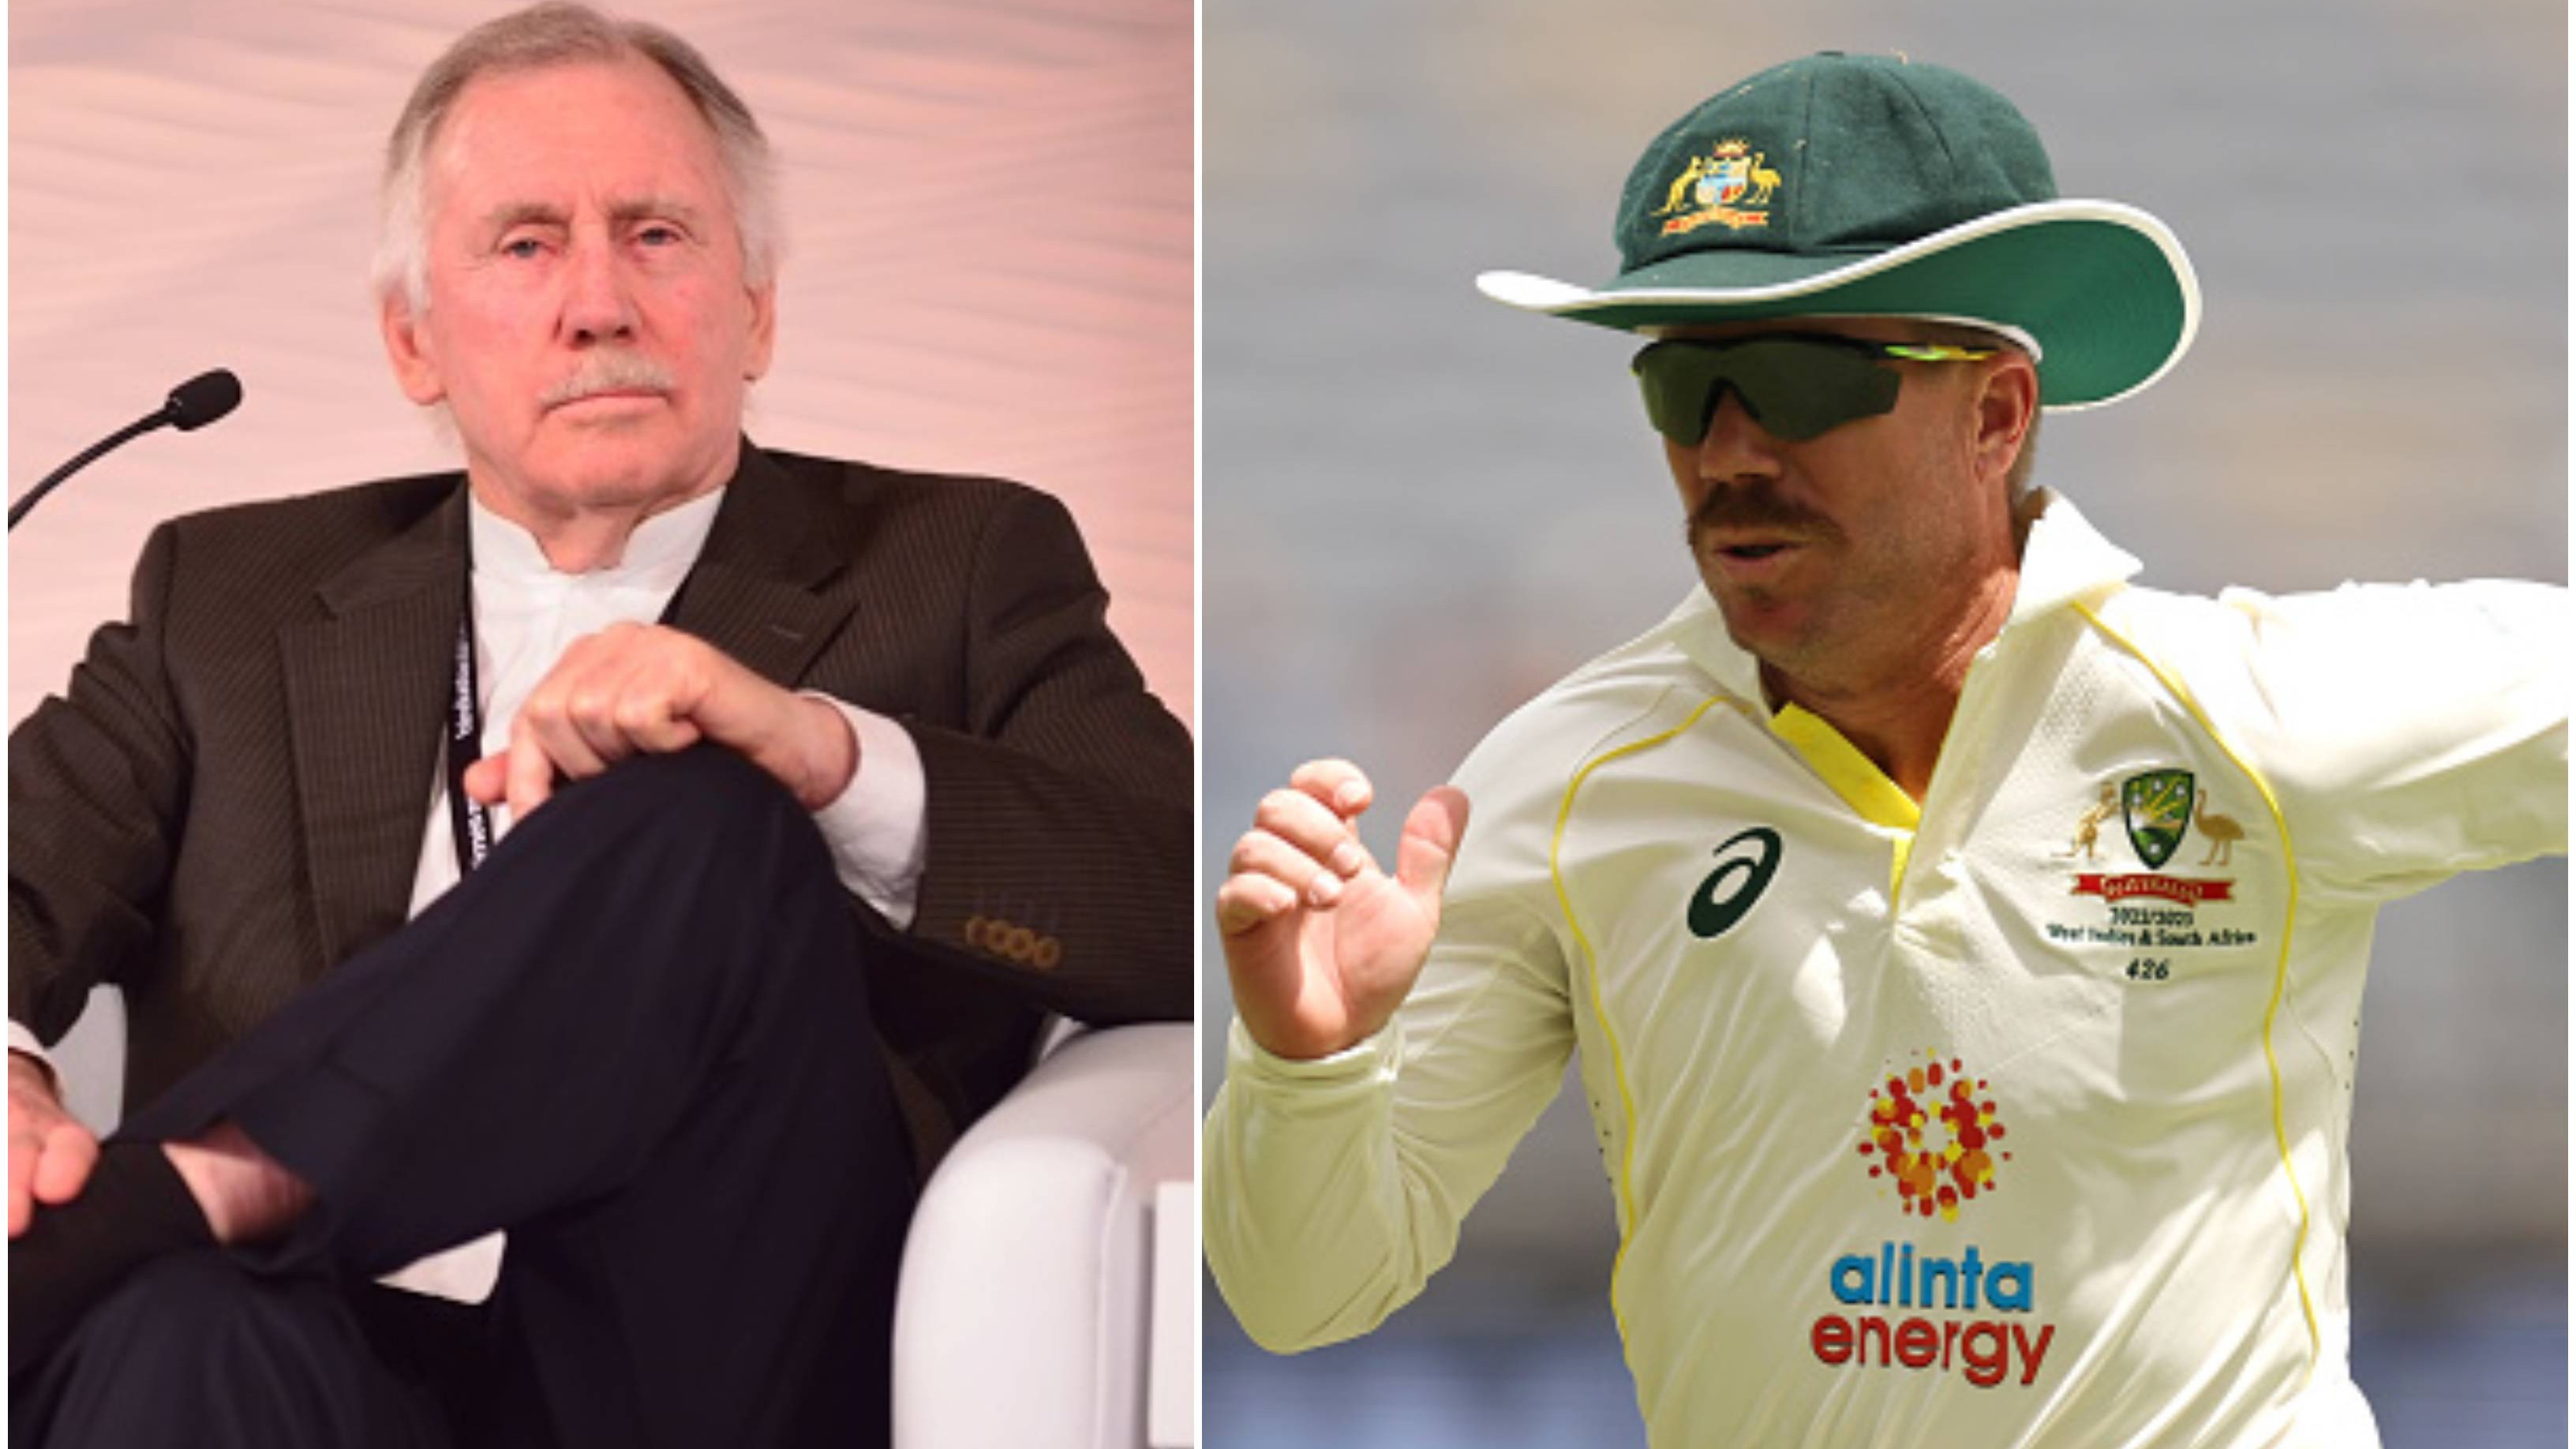 “Renowned for only protecting their own interests,” Ian Chappell slams CA after Warner withdraws appeal against captaincy ban